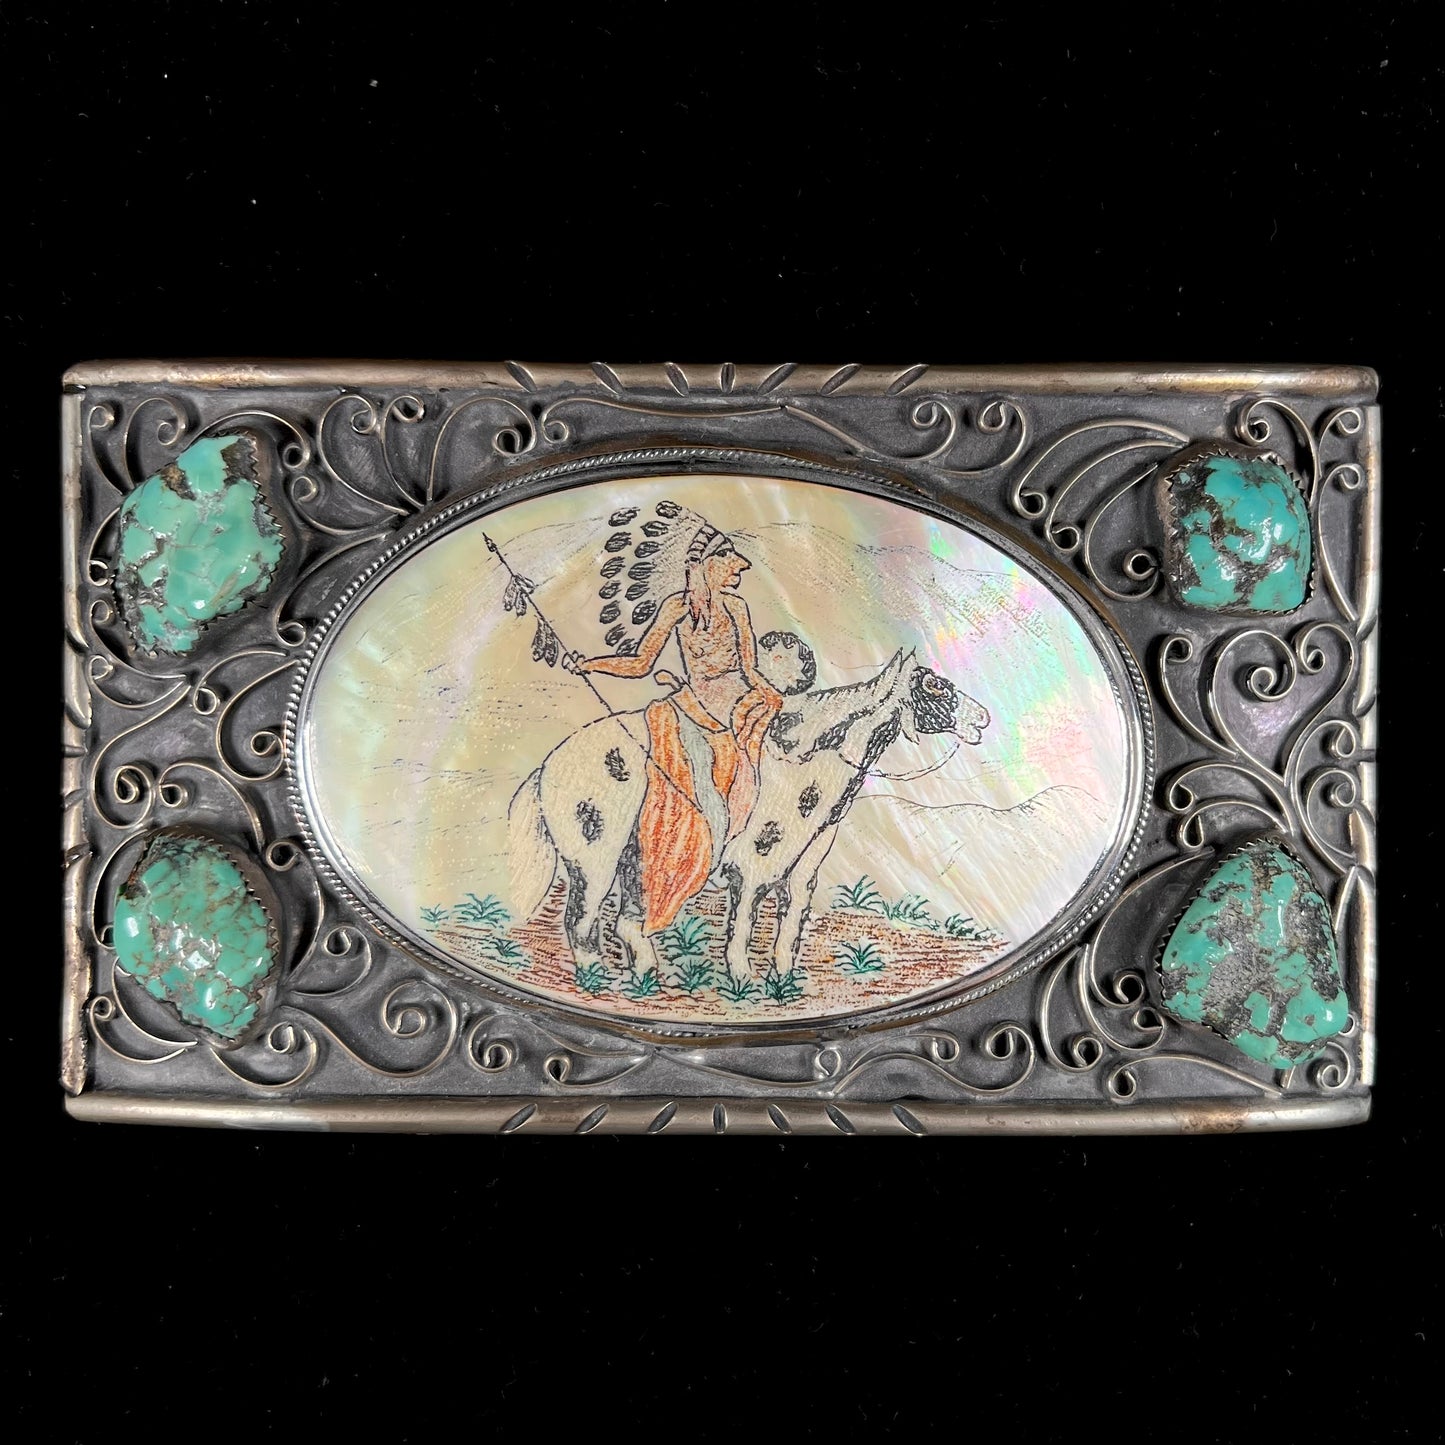 A men's Navajo-made white brass belt buckle set with turquoise nuggets and a mother of pearl stone etched with a Native American riding a horse.